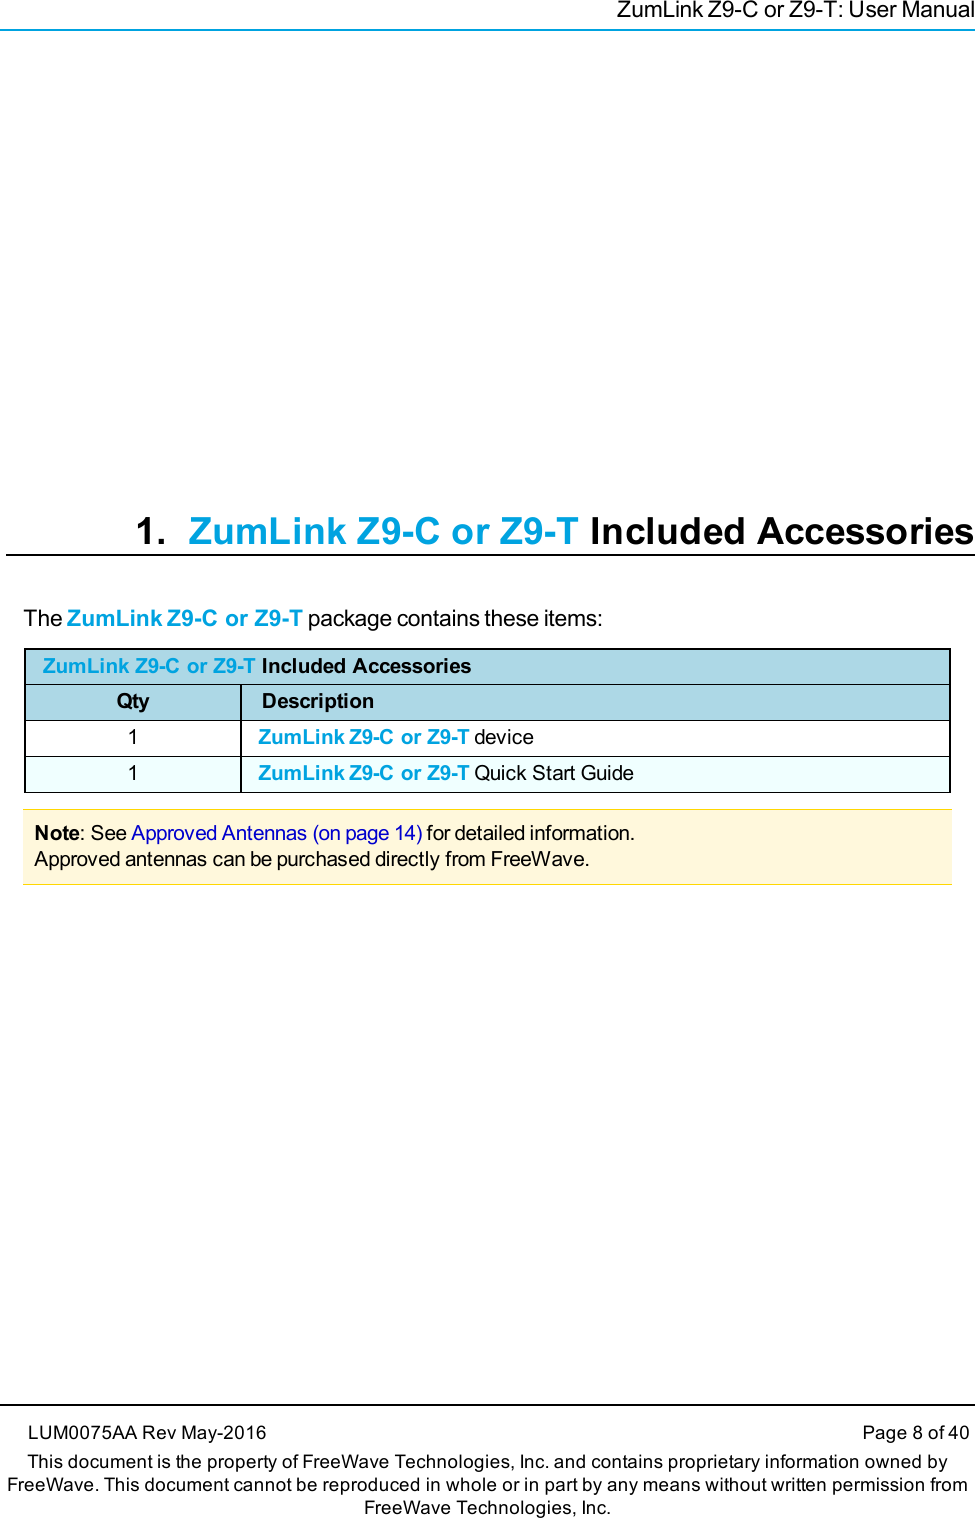 ZumLink Z9-C or Z9-T: User Manual1. ZumLink Z9-C or Z9-T Included AccessoriesThe ZumLink Z9-C or Z9-T package contains these items:ZumLink Z9-C or Z9-T Included AccessoriesQty Description1ZumLink Z9-C or Z9-T device1ZumLink Z9-C or Z9-T Quick Start GuideNote: See Approved Antennas (on page 14) for detailed information.Approved antennas can be purchased directly from FreeWave.LUM0075AA Rev May-2016 Page 8 of 40This document is the property of FreeWave Technologies, Inc. and contains proprietary information owned byFreeWave. This document cannot be reproduced in whole or in part by any means without written permission fromFreeWave Technologies, Inc.